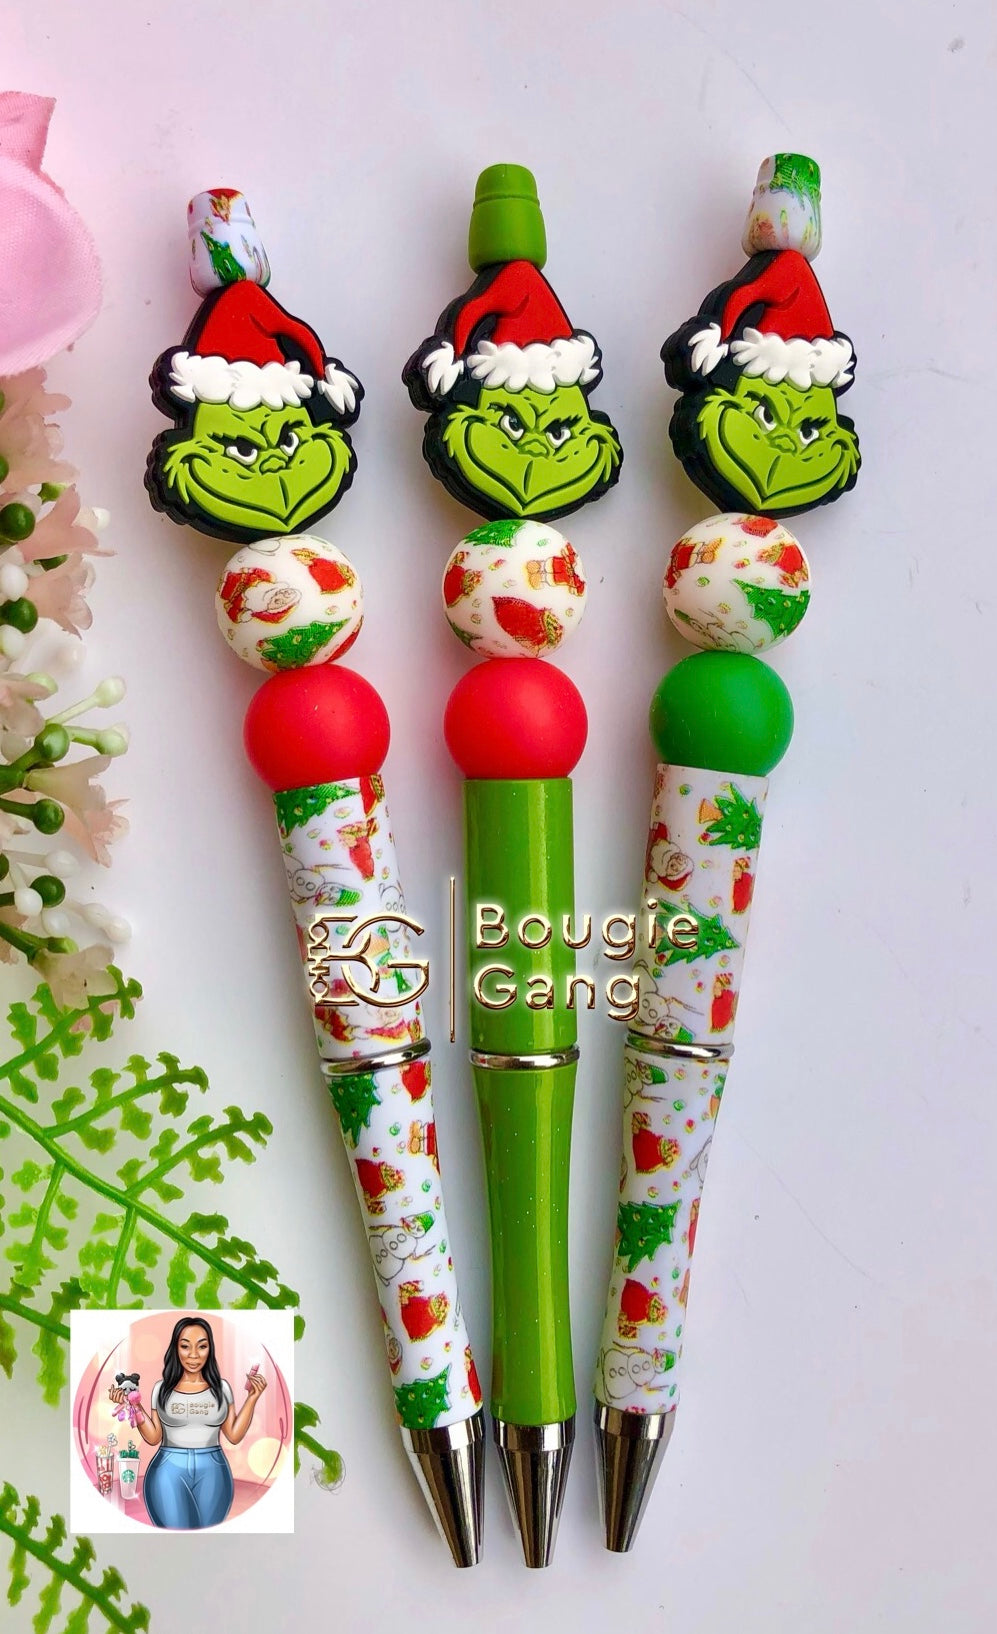 Qilery 48 Pcs Christmas Beadable Pens Bulk Red Green White Plastic Bead  Pens with 240 Assorted Wooden Beads Crystal Beads DIY Pen Making Kit Black  Ink